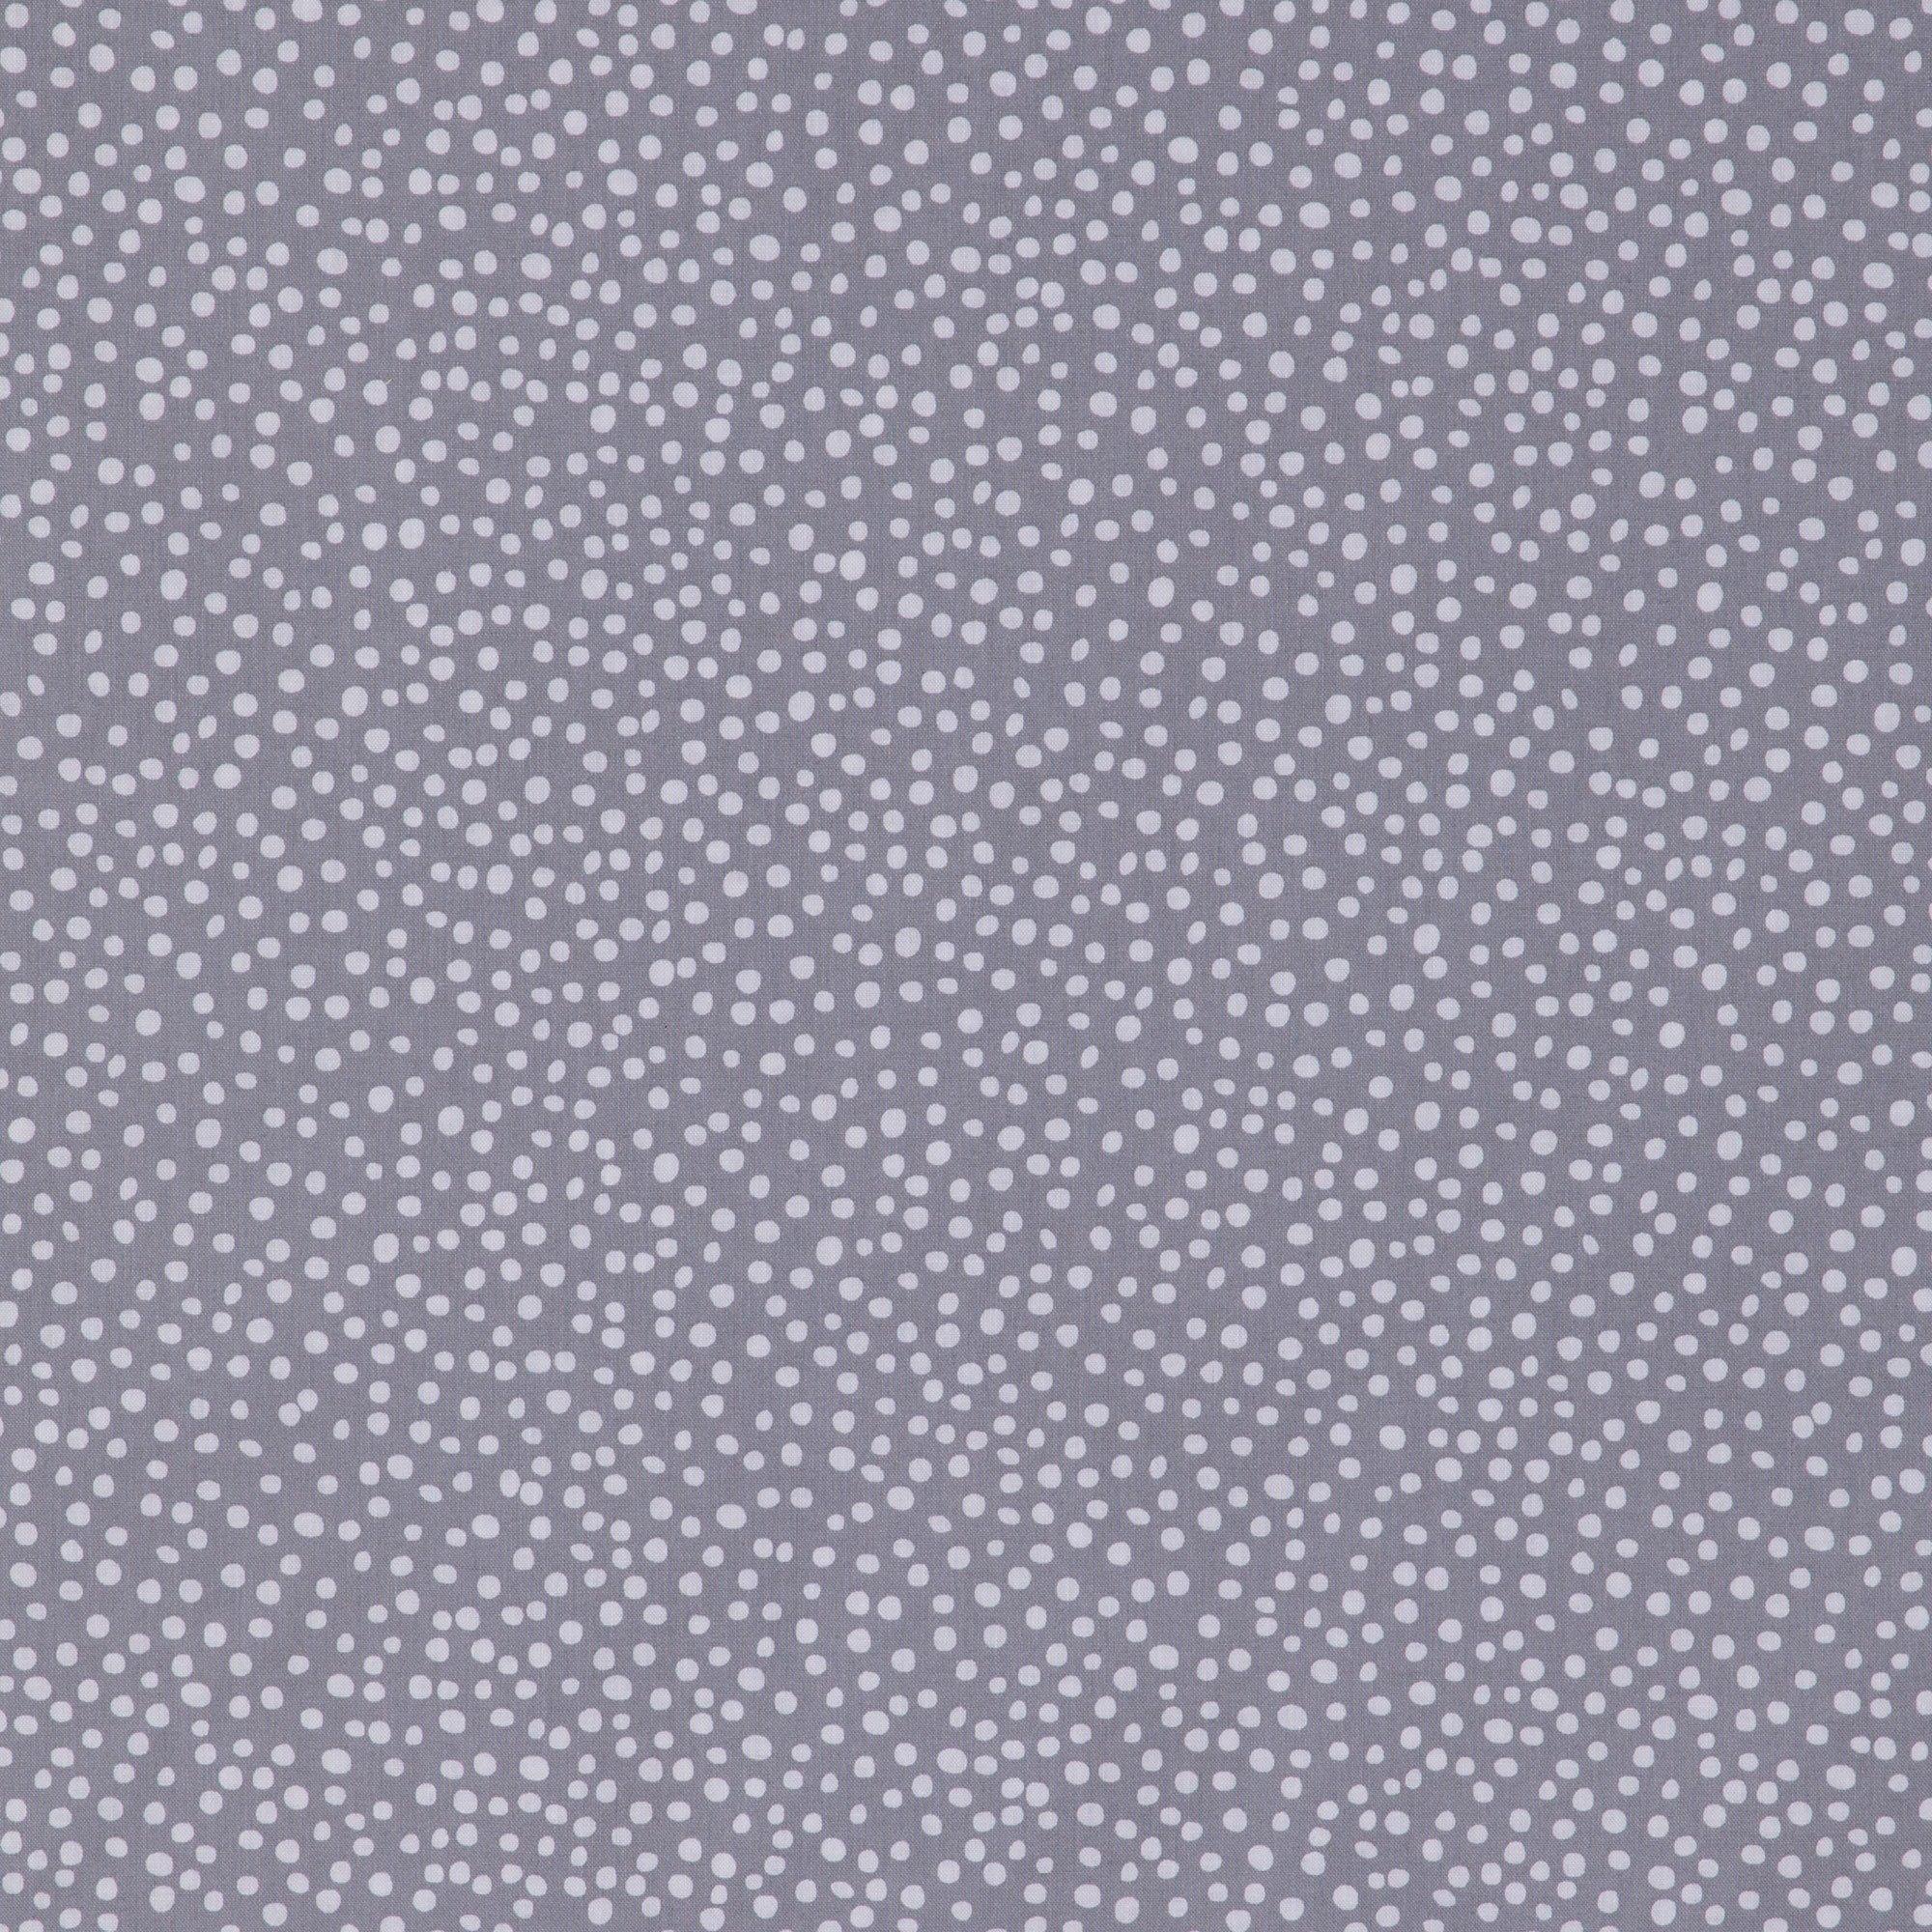 Scatter Dot Cotton Calico Fabric | Hobby Lobby | 1916303